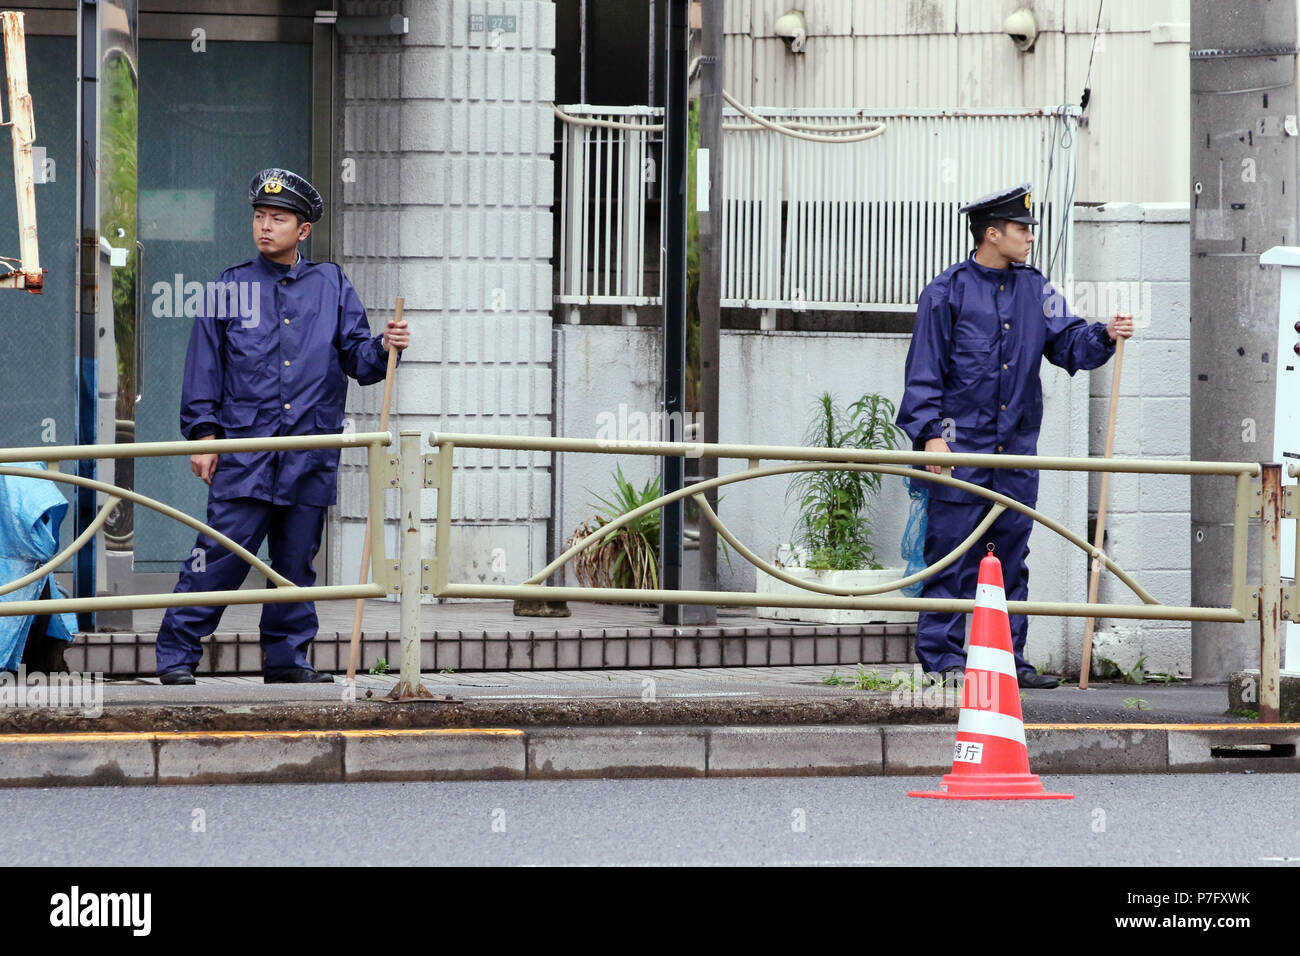 Tokyo, Japan. 6th July, 2018. Police officers stand at the entrance of a facility of a cult group Aleph in Tokyo on Friday, July 6, 2018. Aleph is a succession group of the doomsday cult AUM Shinrikyowhich which killed 29 people by Sarin gas attack at Tokyo subway in 1994. AUM guru Shoko Asahara was excuted at the Tokyo detention center for numerious crimes on July 6. Credit: Yoshio Tsunoda/AFLO/Alamy Live News Stock Photo